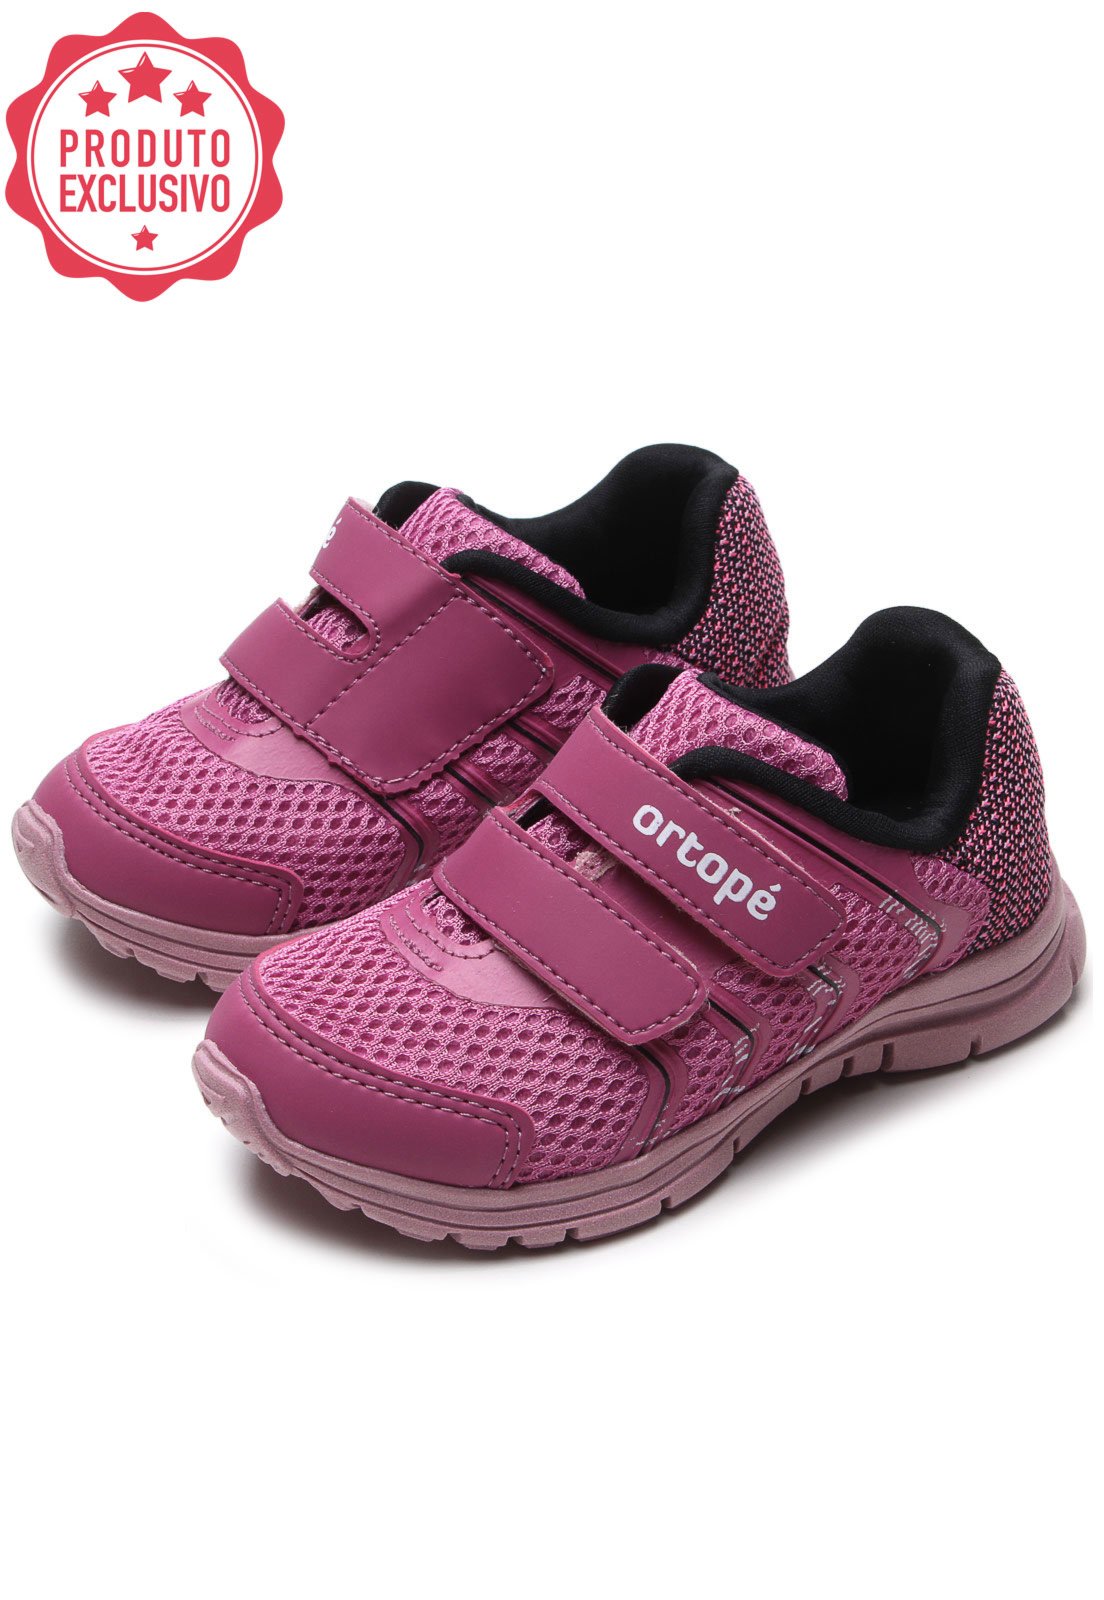 after that Voltage Metal line Tenis Ortope Rosa Hotsell, 55% OFF | fderechoydiscapacidad.es